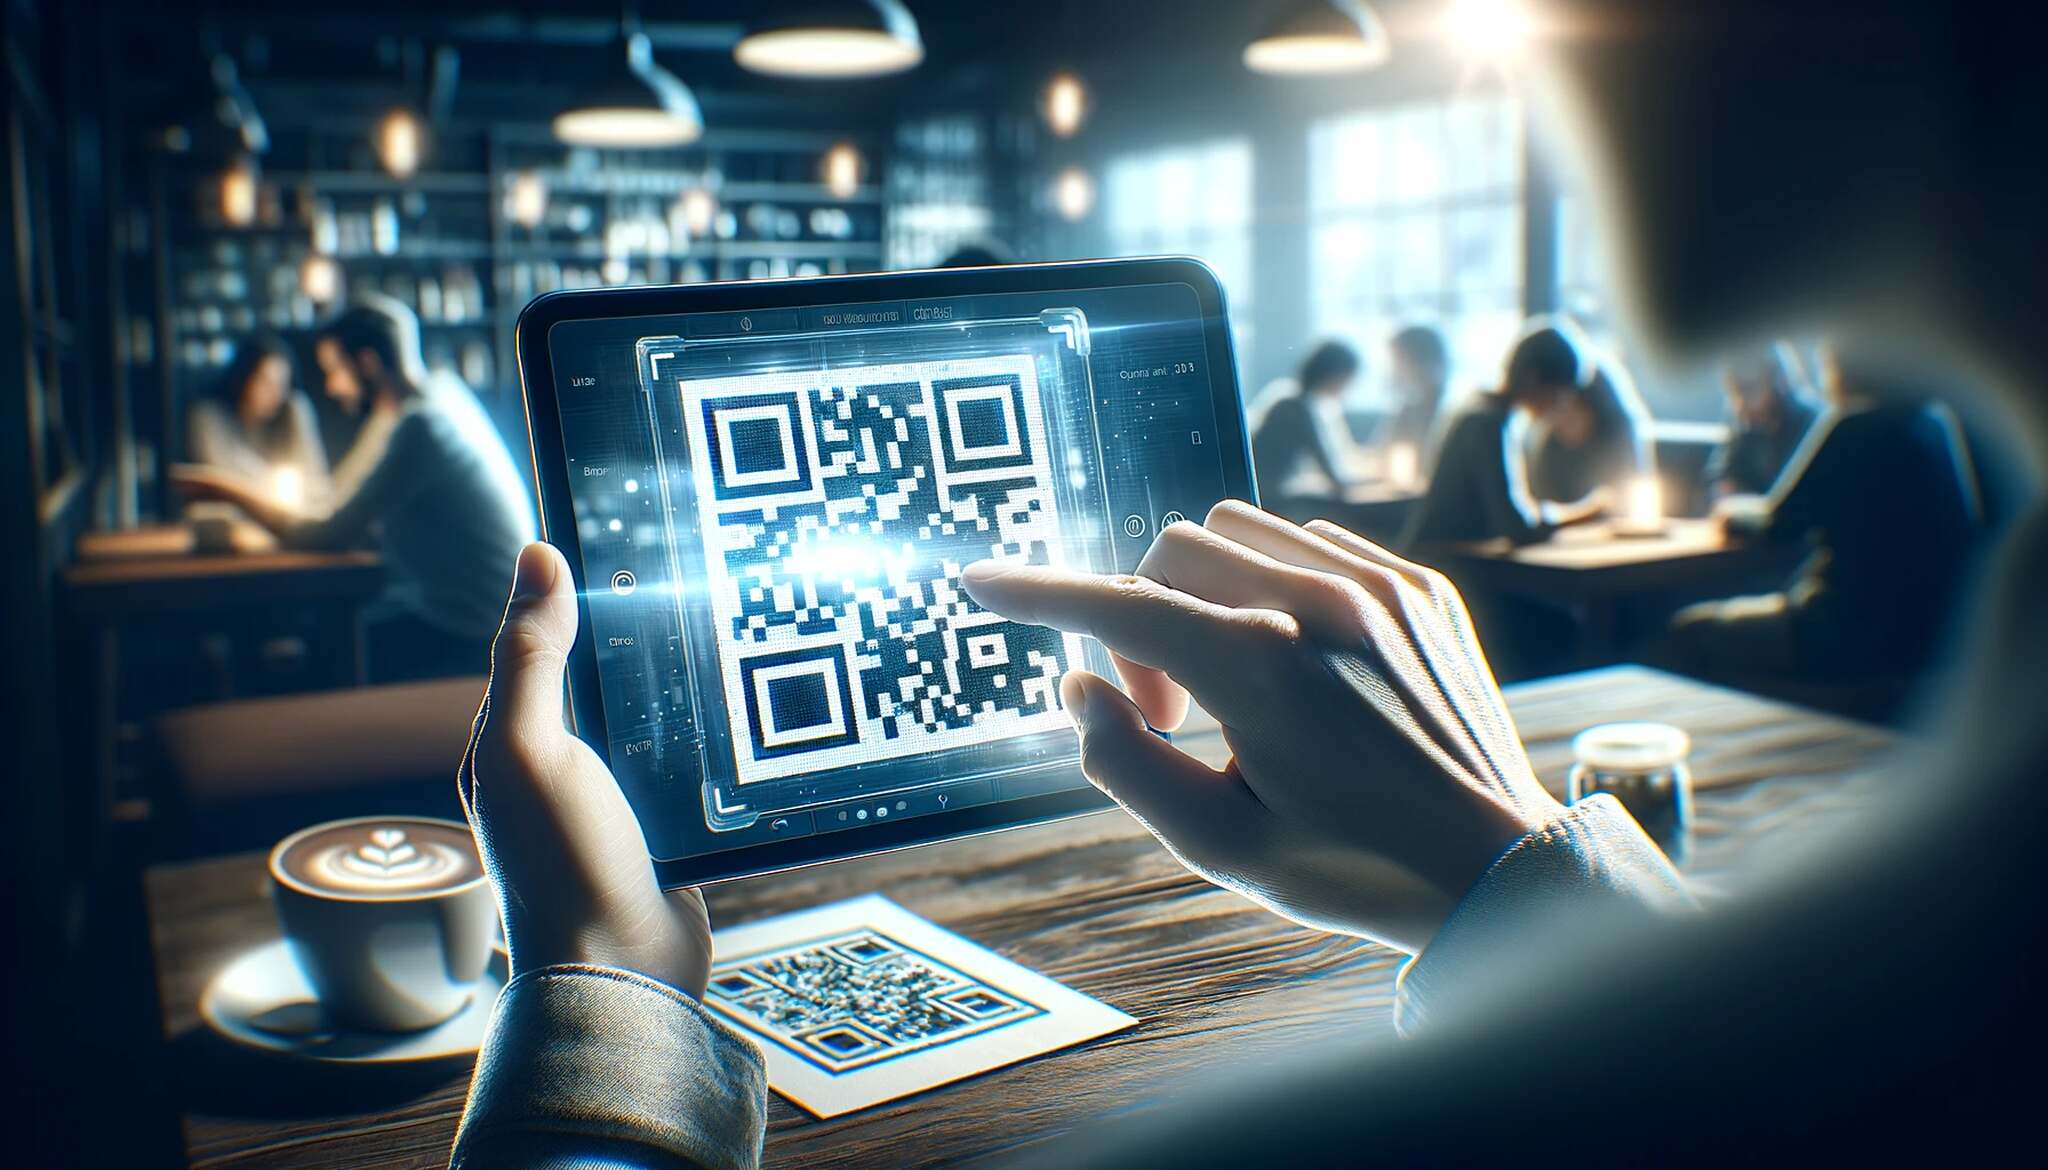 An illustration of a person using iPad to scan a QR code on a table